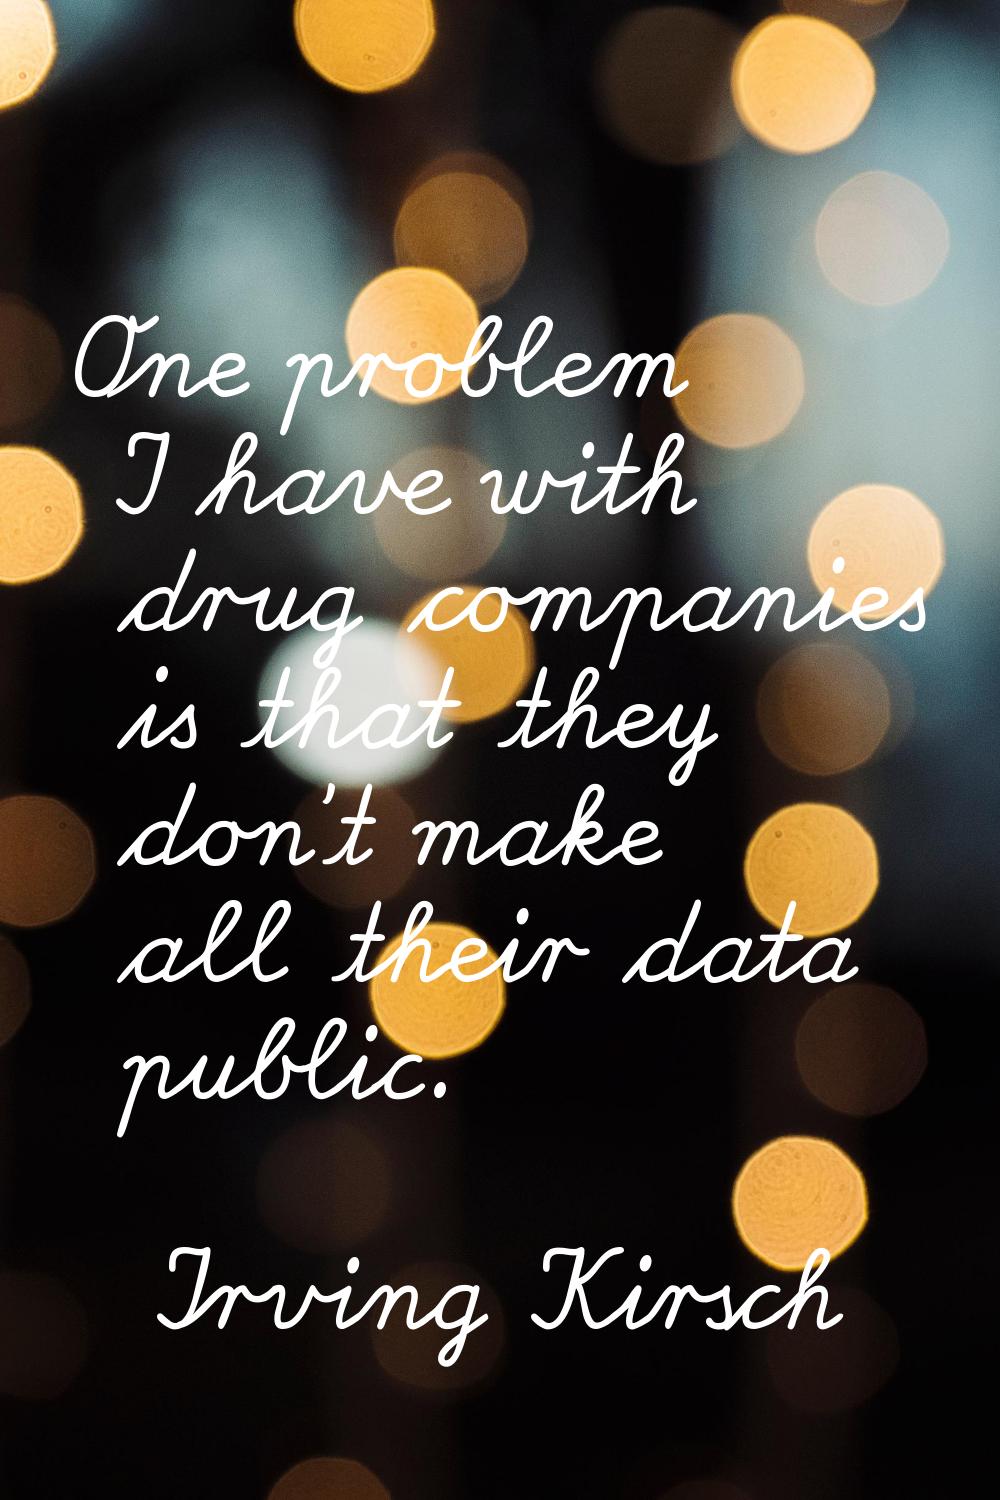 One problem I have with drug companies is that they don't make all their data public.